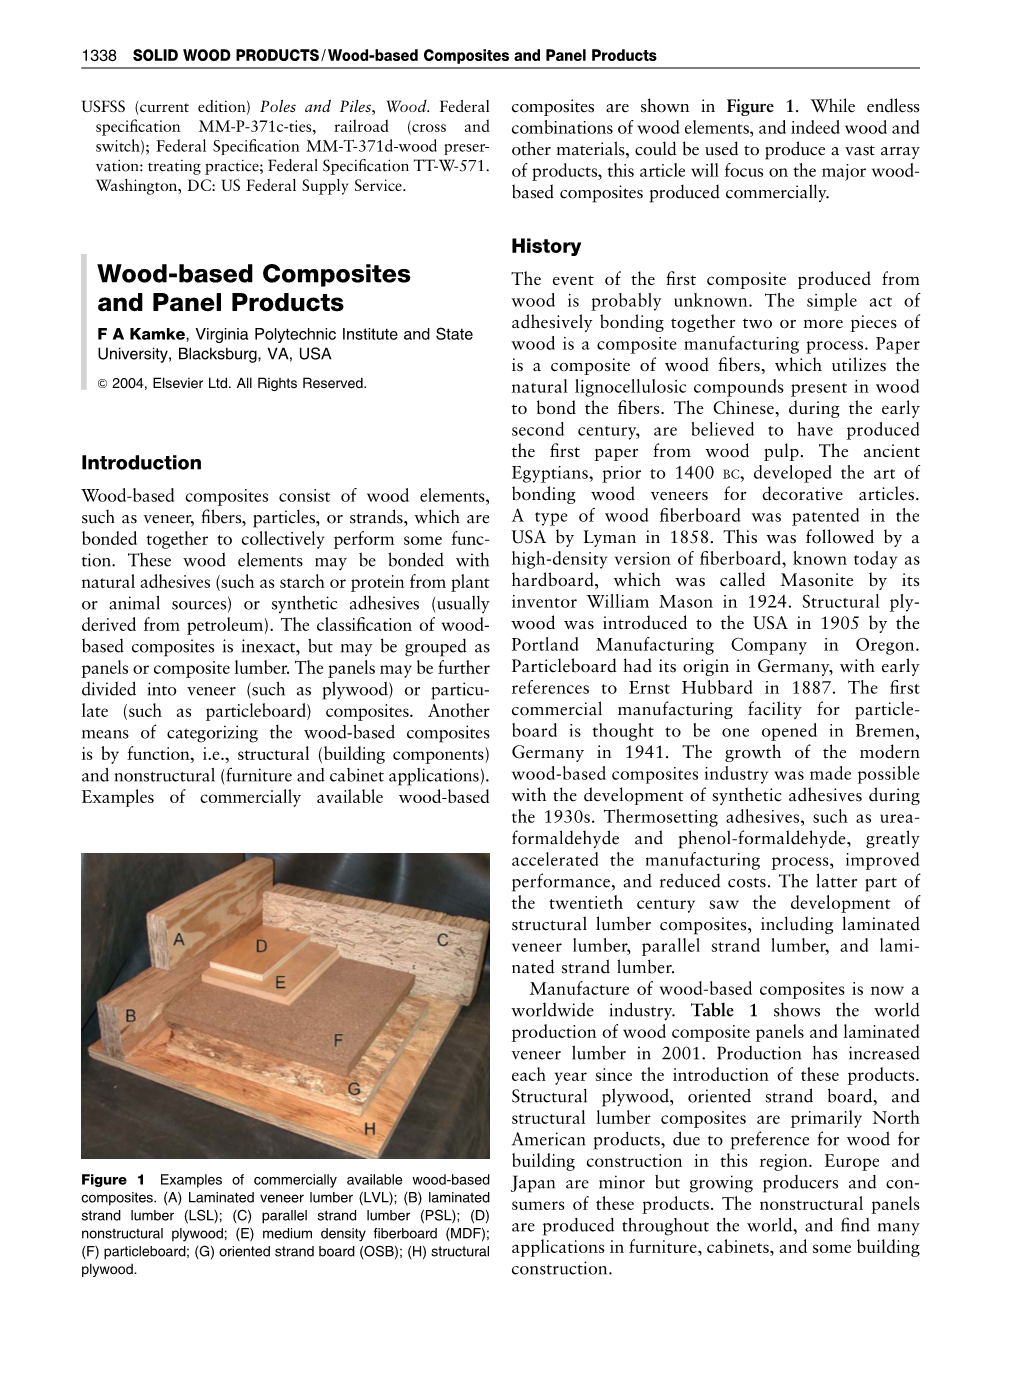 Wood-Based Composites and Panel Products